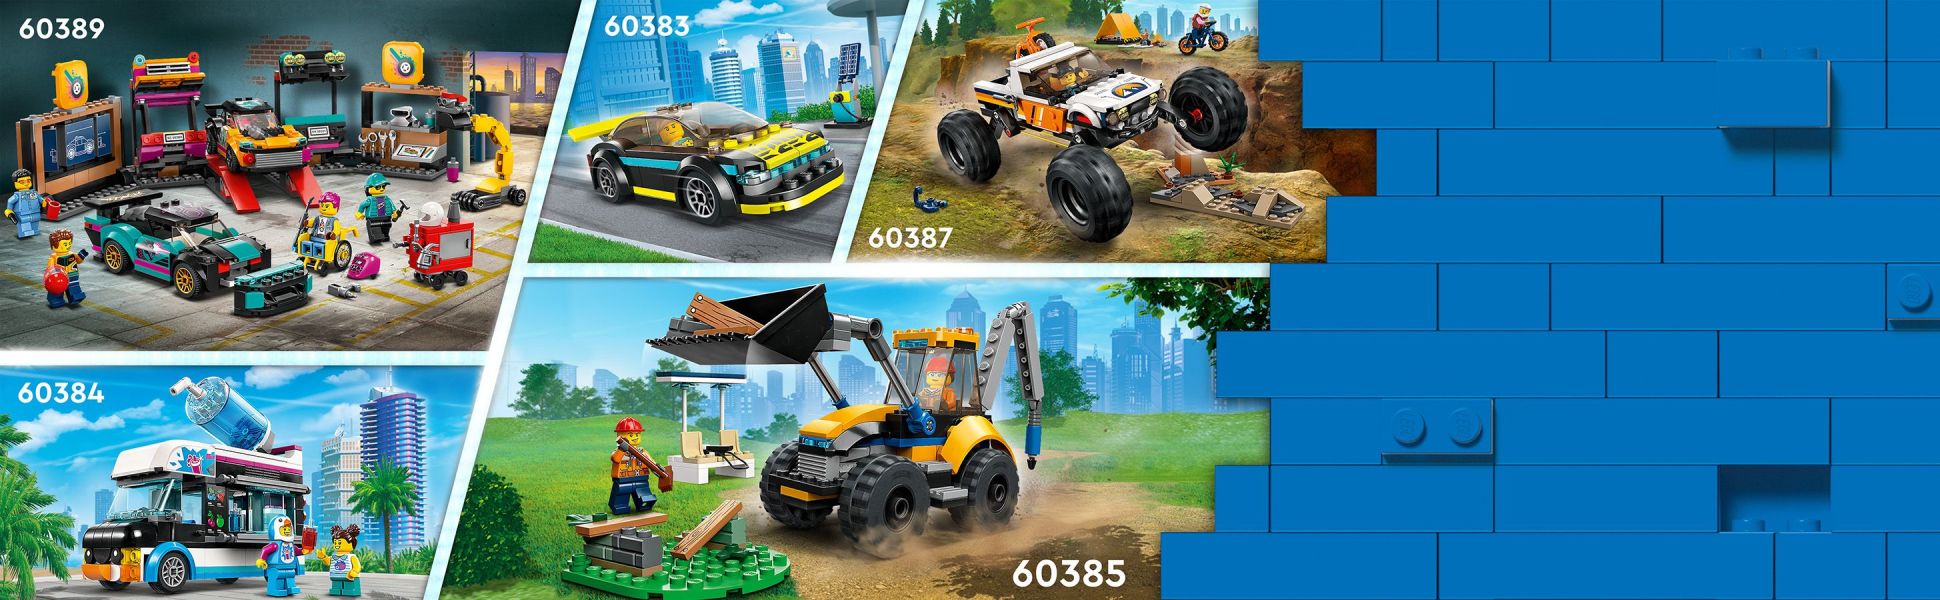 LEGO City Construction Digger 60385 Building Toy - Excavator Model  Featuring Tools and Minifigures, Vehicle Building Set for Fun Creative  Play, Birthday Gift Idea for Boys, Girls, and Kids Ages 5+ 